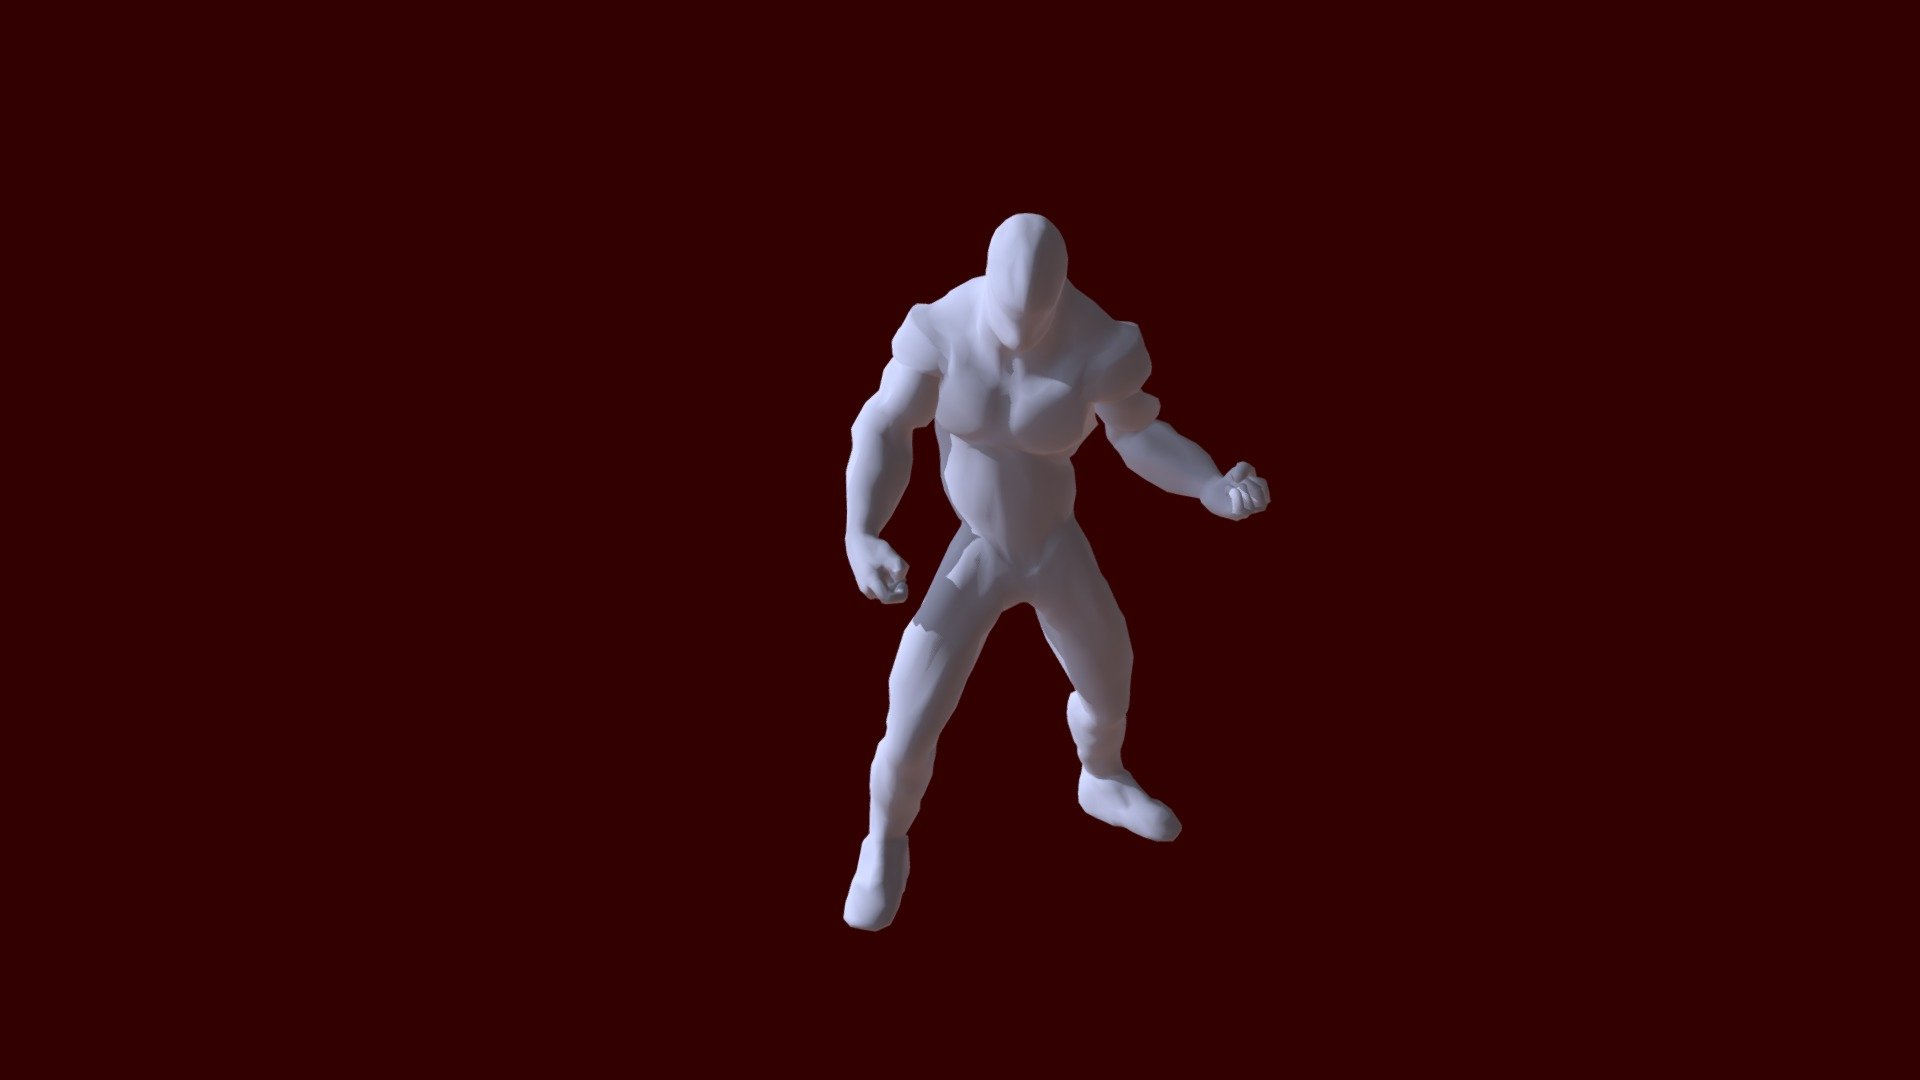 Attack Combo Animation - 3D model by ThomasCastle 3d model